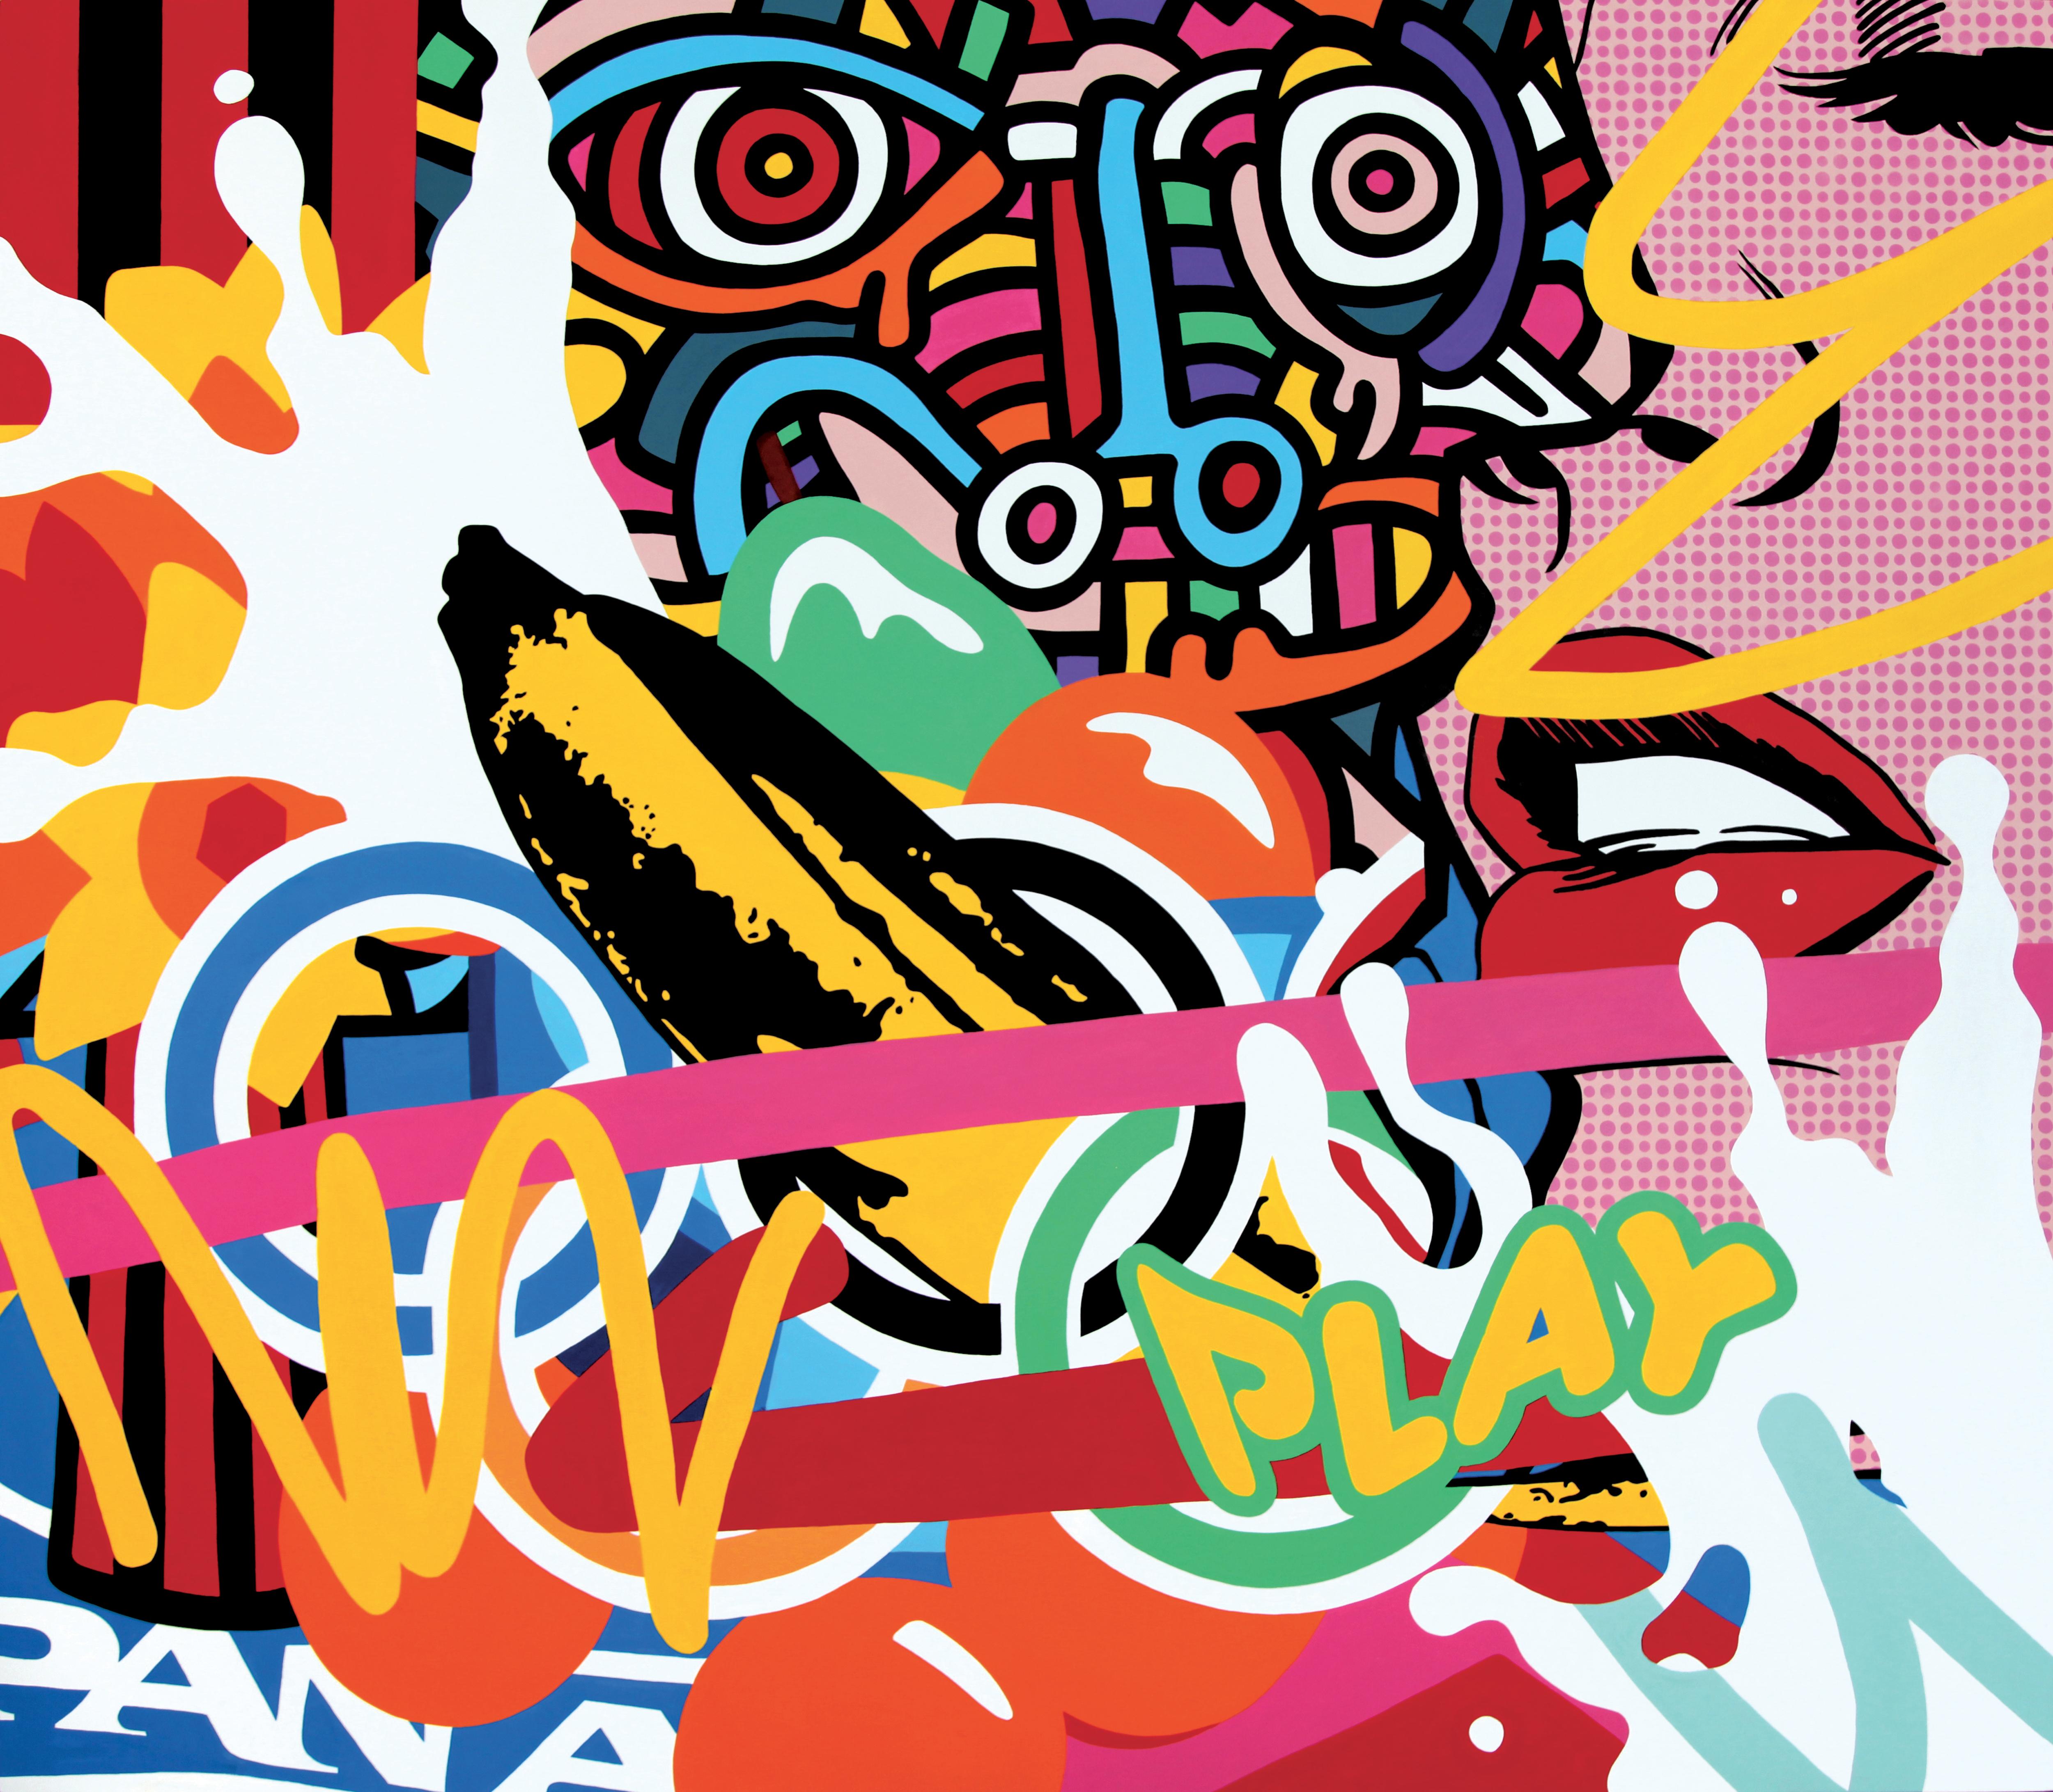 Acrylic on canvas painting by Speedy Graphito entitled, "Play", which was created in 2017 for his solo exhibition, "An American Story" at the Fabien Castanier Gallery Miami Wynwood location.

Olivier Rizzo, aka SPEEDY GRAPHITO, was born in Paris in